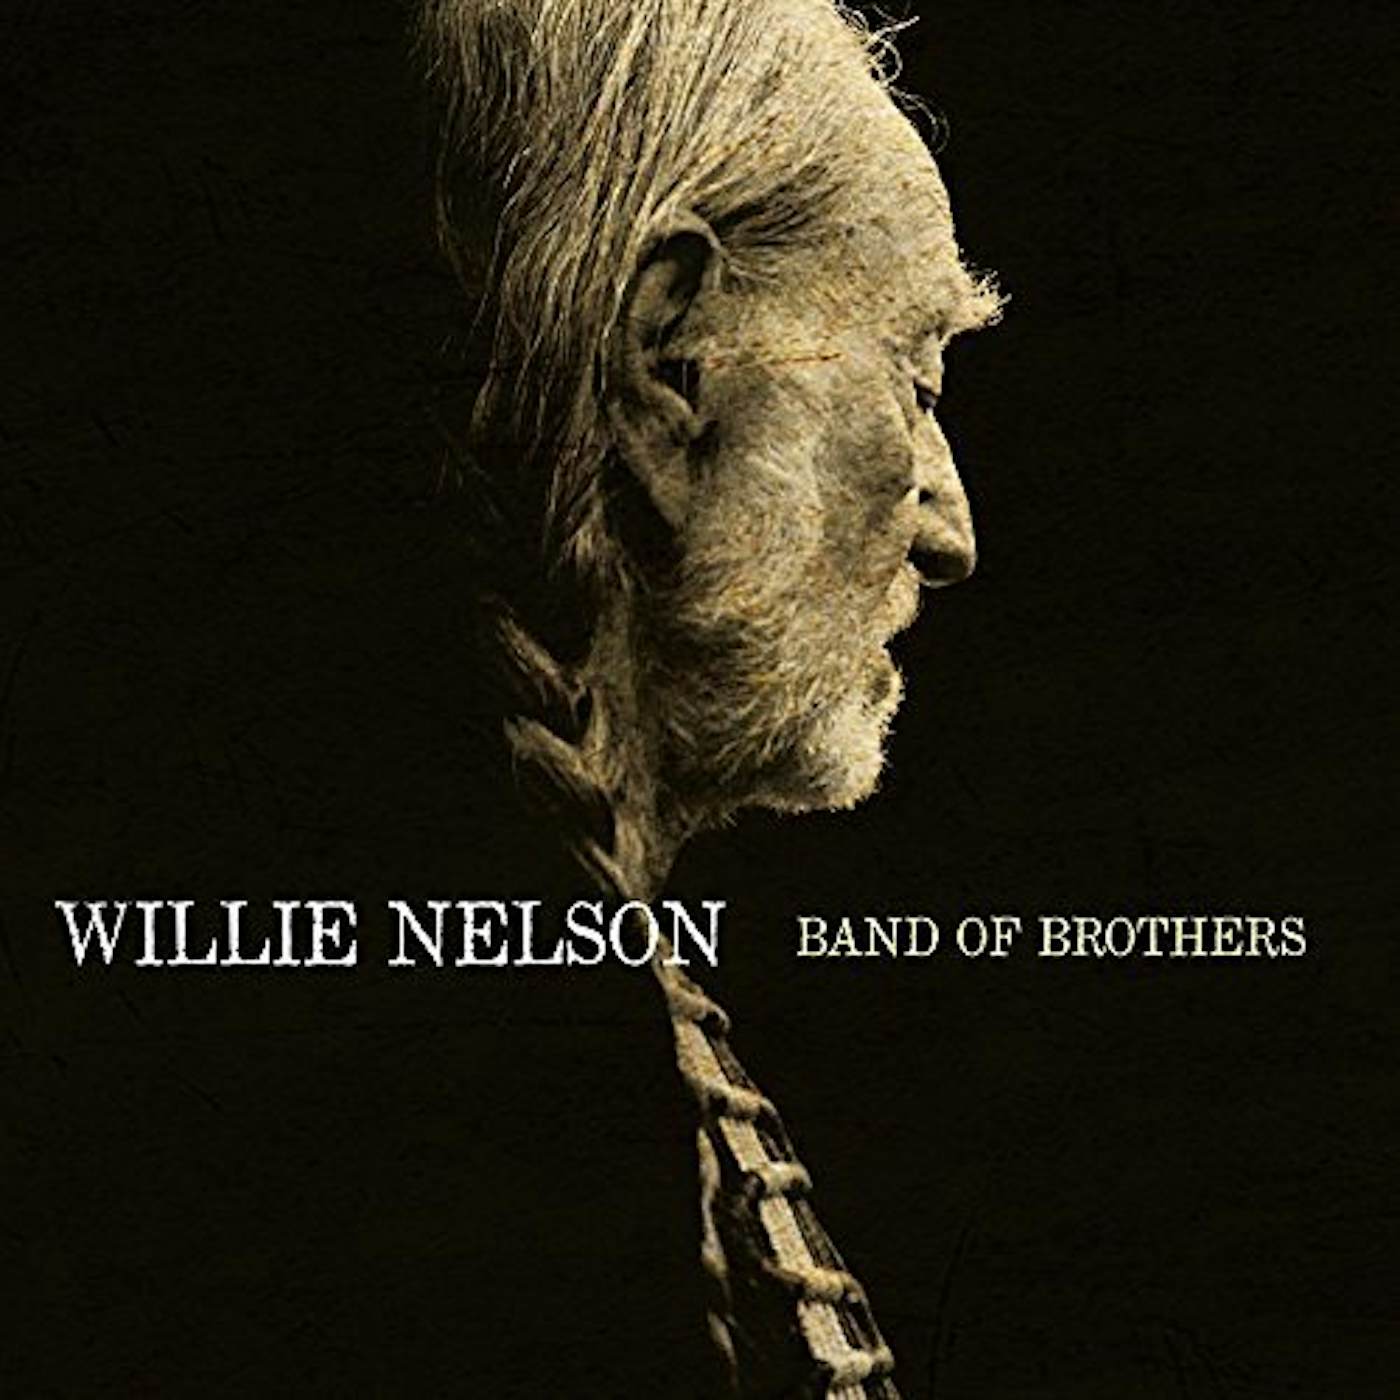 Willie Nelson Band of Brothers Vinyl Record